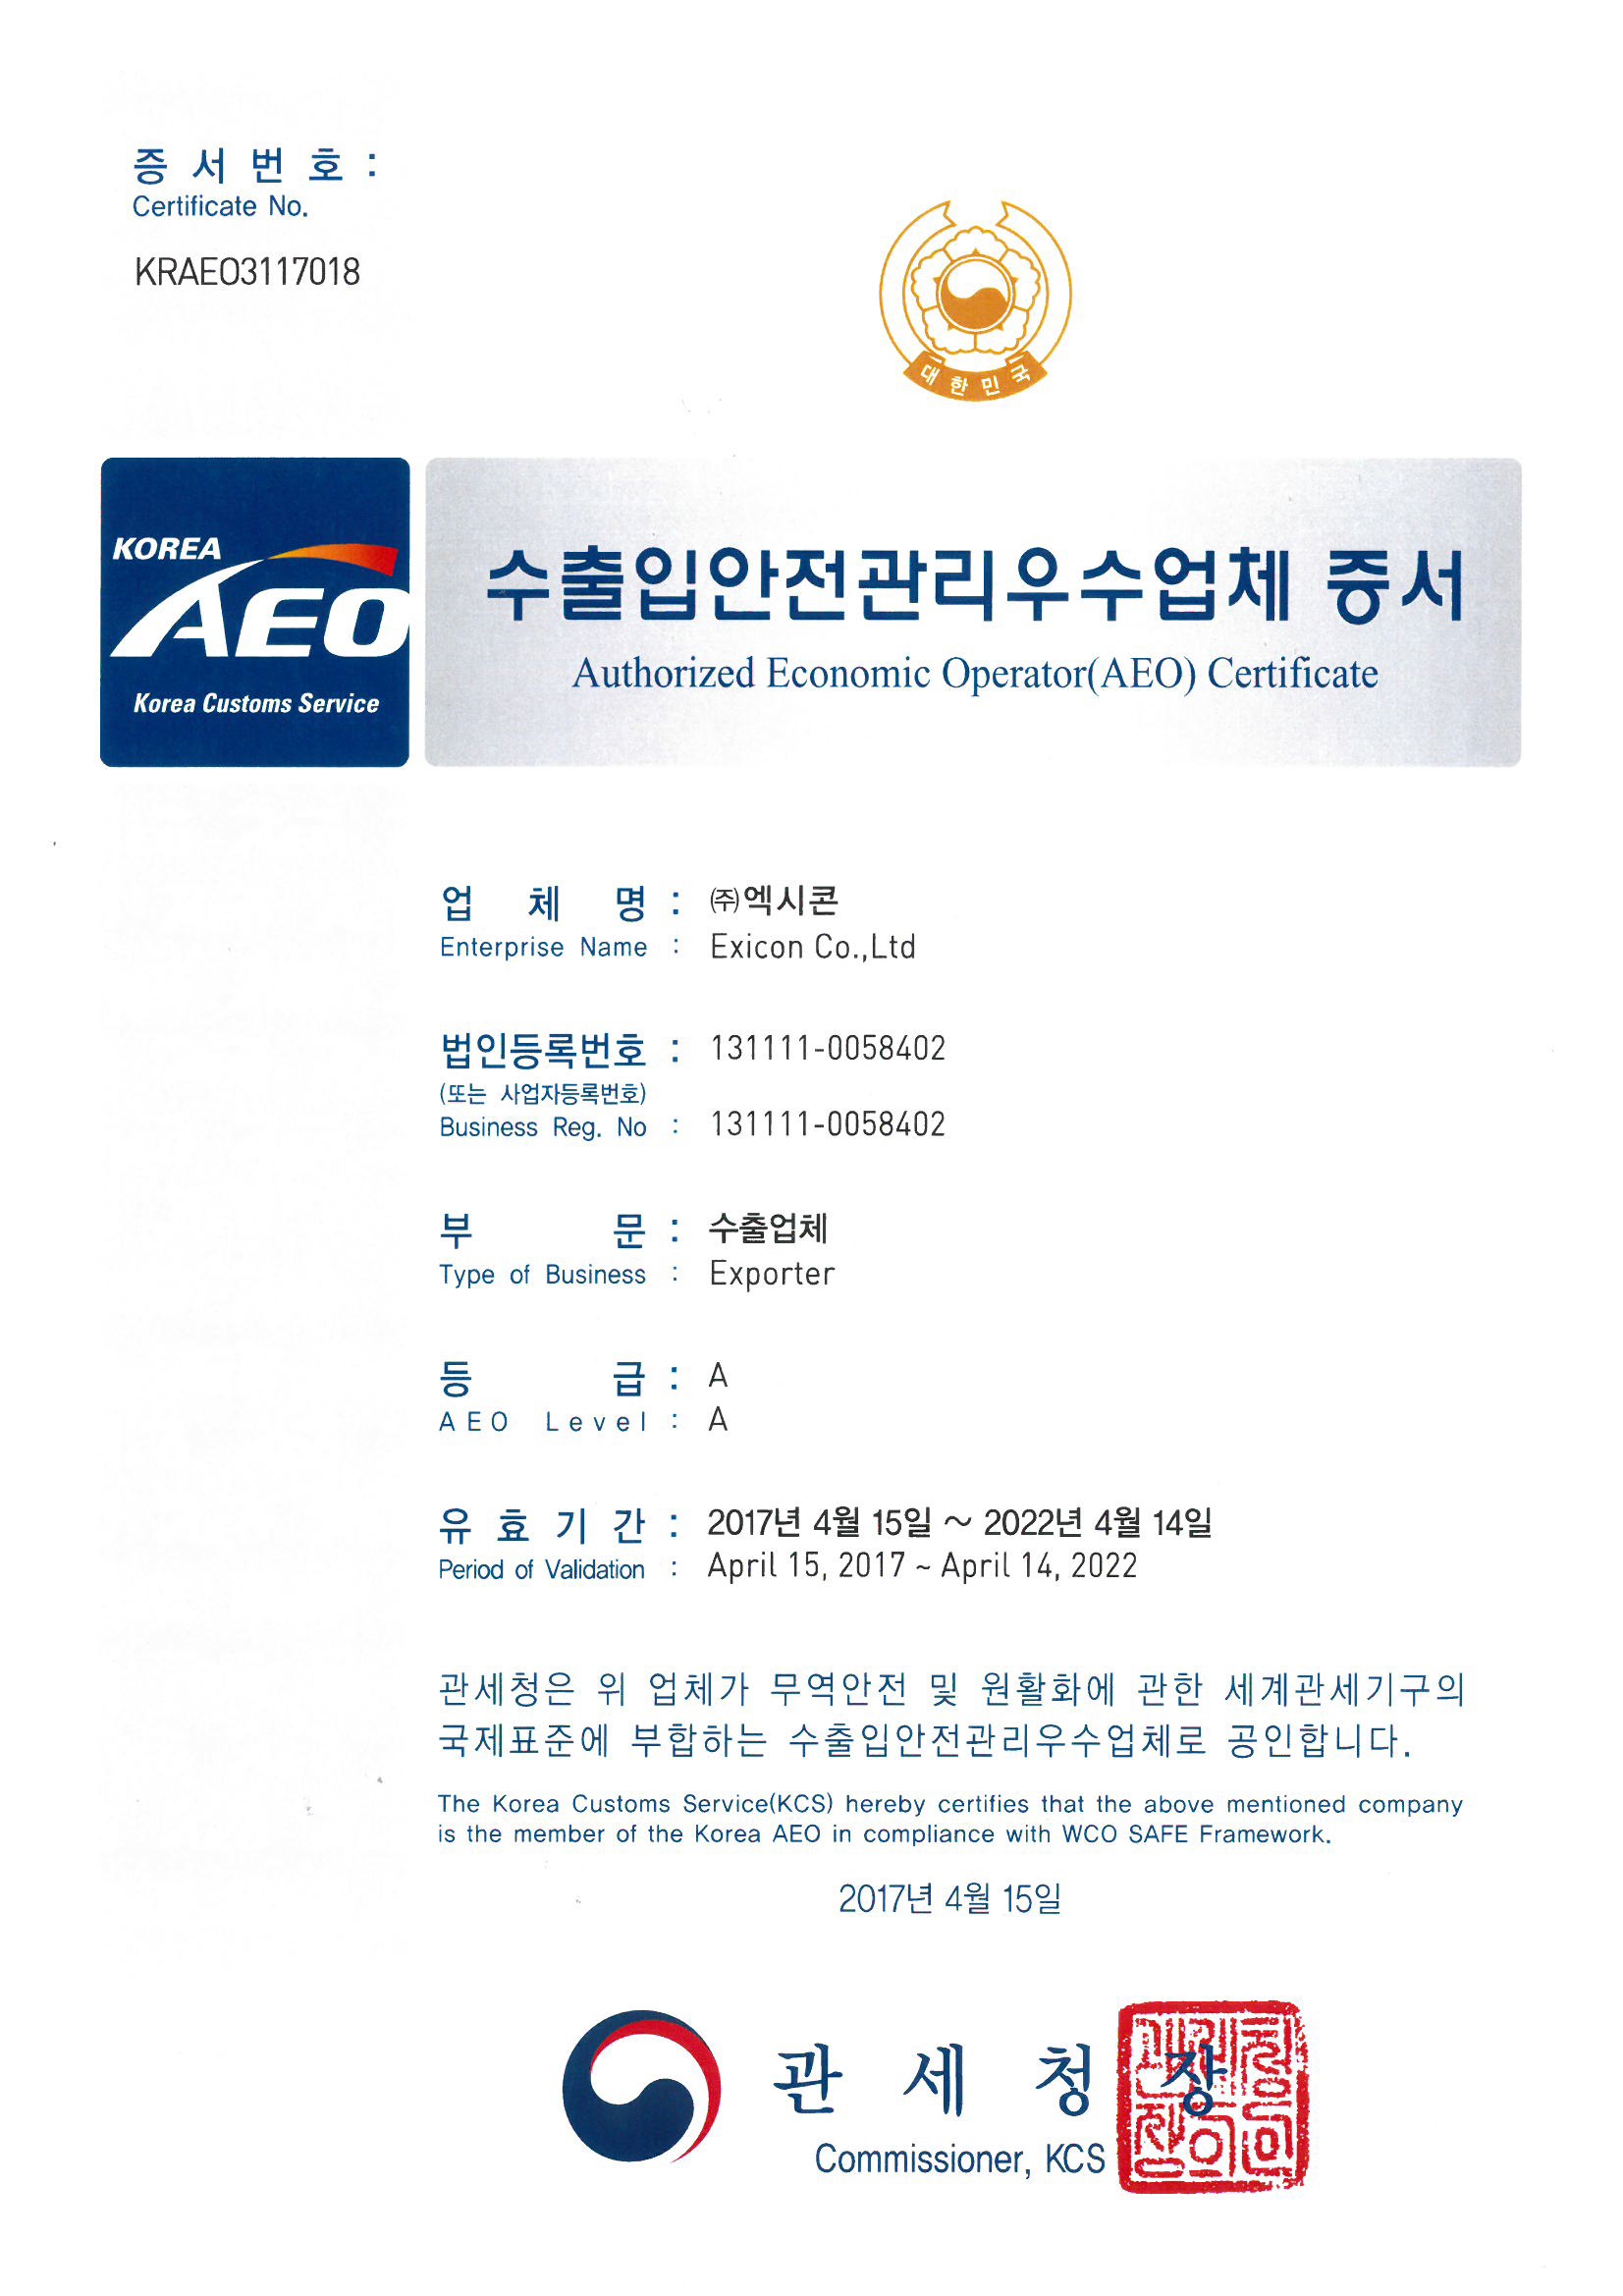 AEO Certificate 썸네일